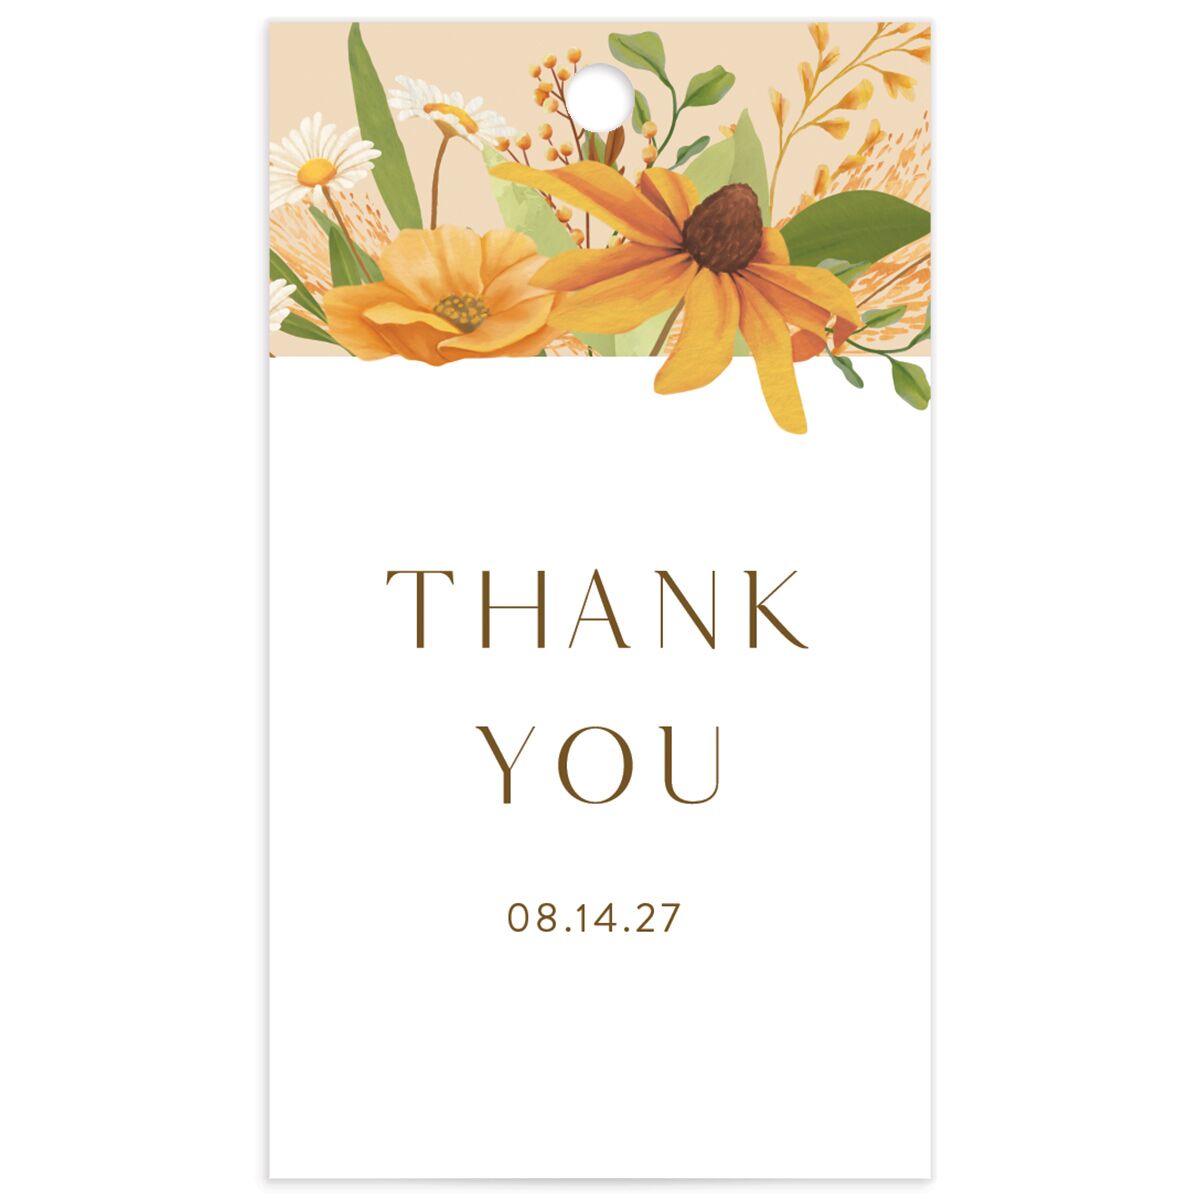 Sweet Sunflowers Favor Gift Tags